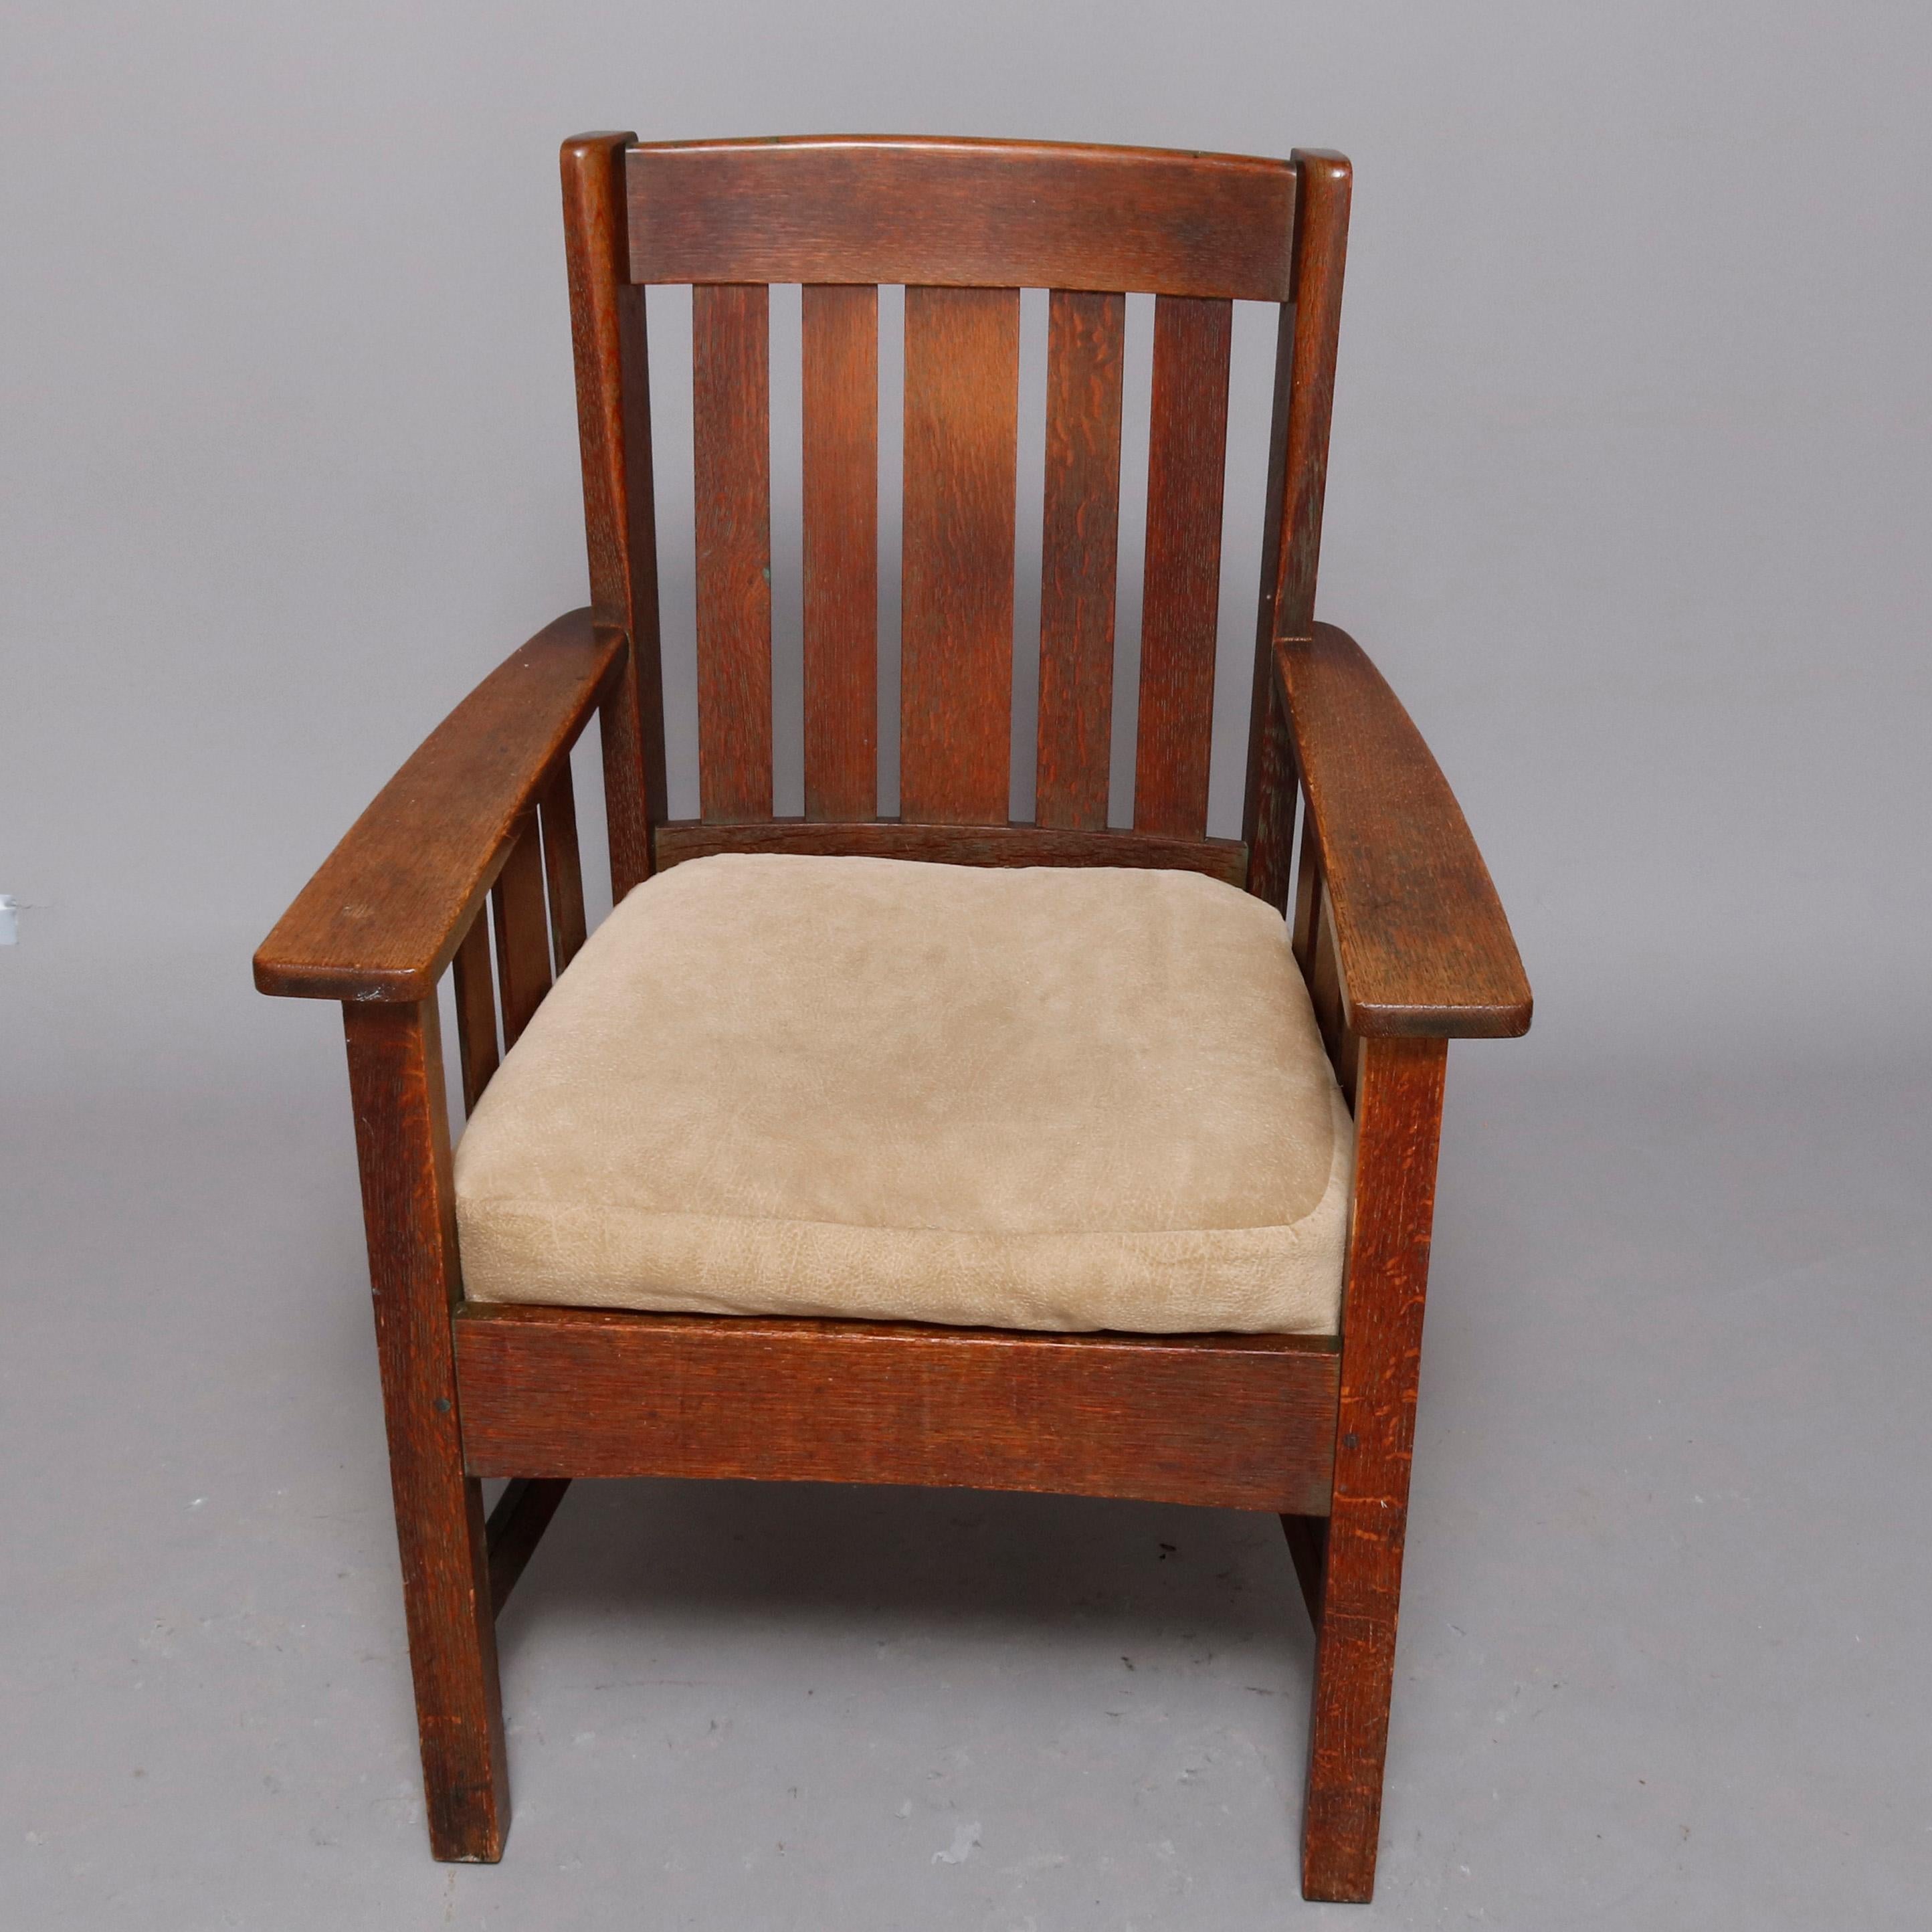 An antique Arts & Crafts Mission oak wing back chair by Stickley Brothers offers Model 405 1/2 having quarter sawn oak construction with slat backs having flanking wings and slat arms with cushion and raised on straight and square legs, model number